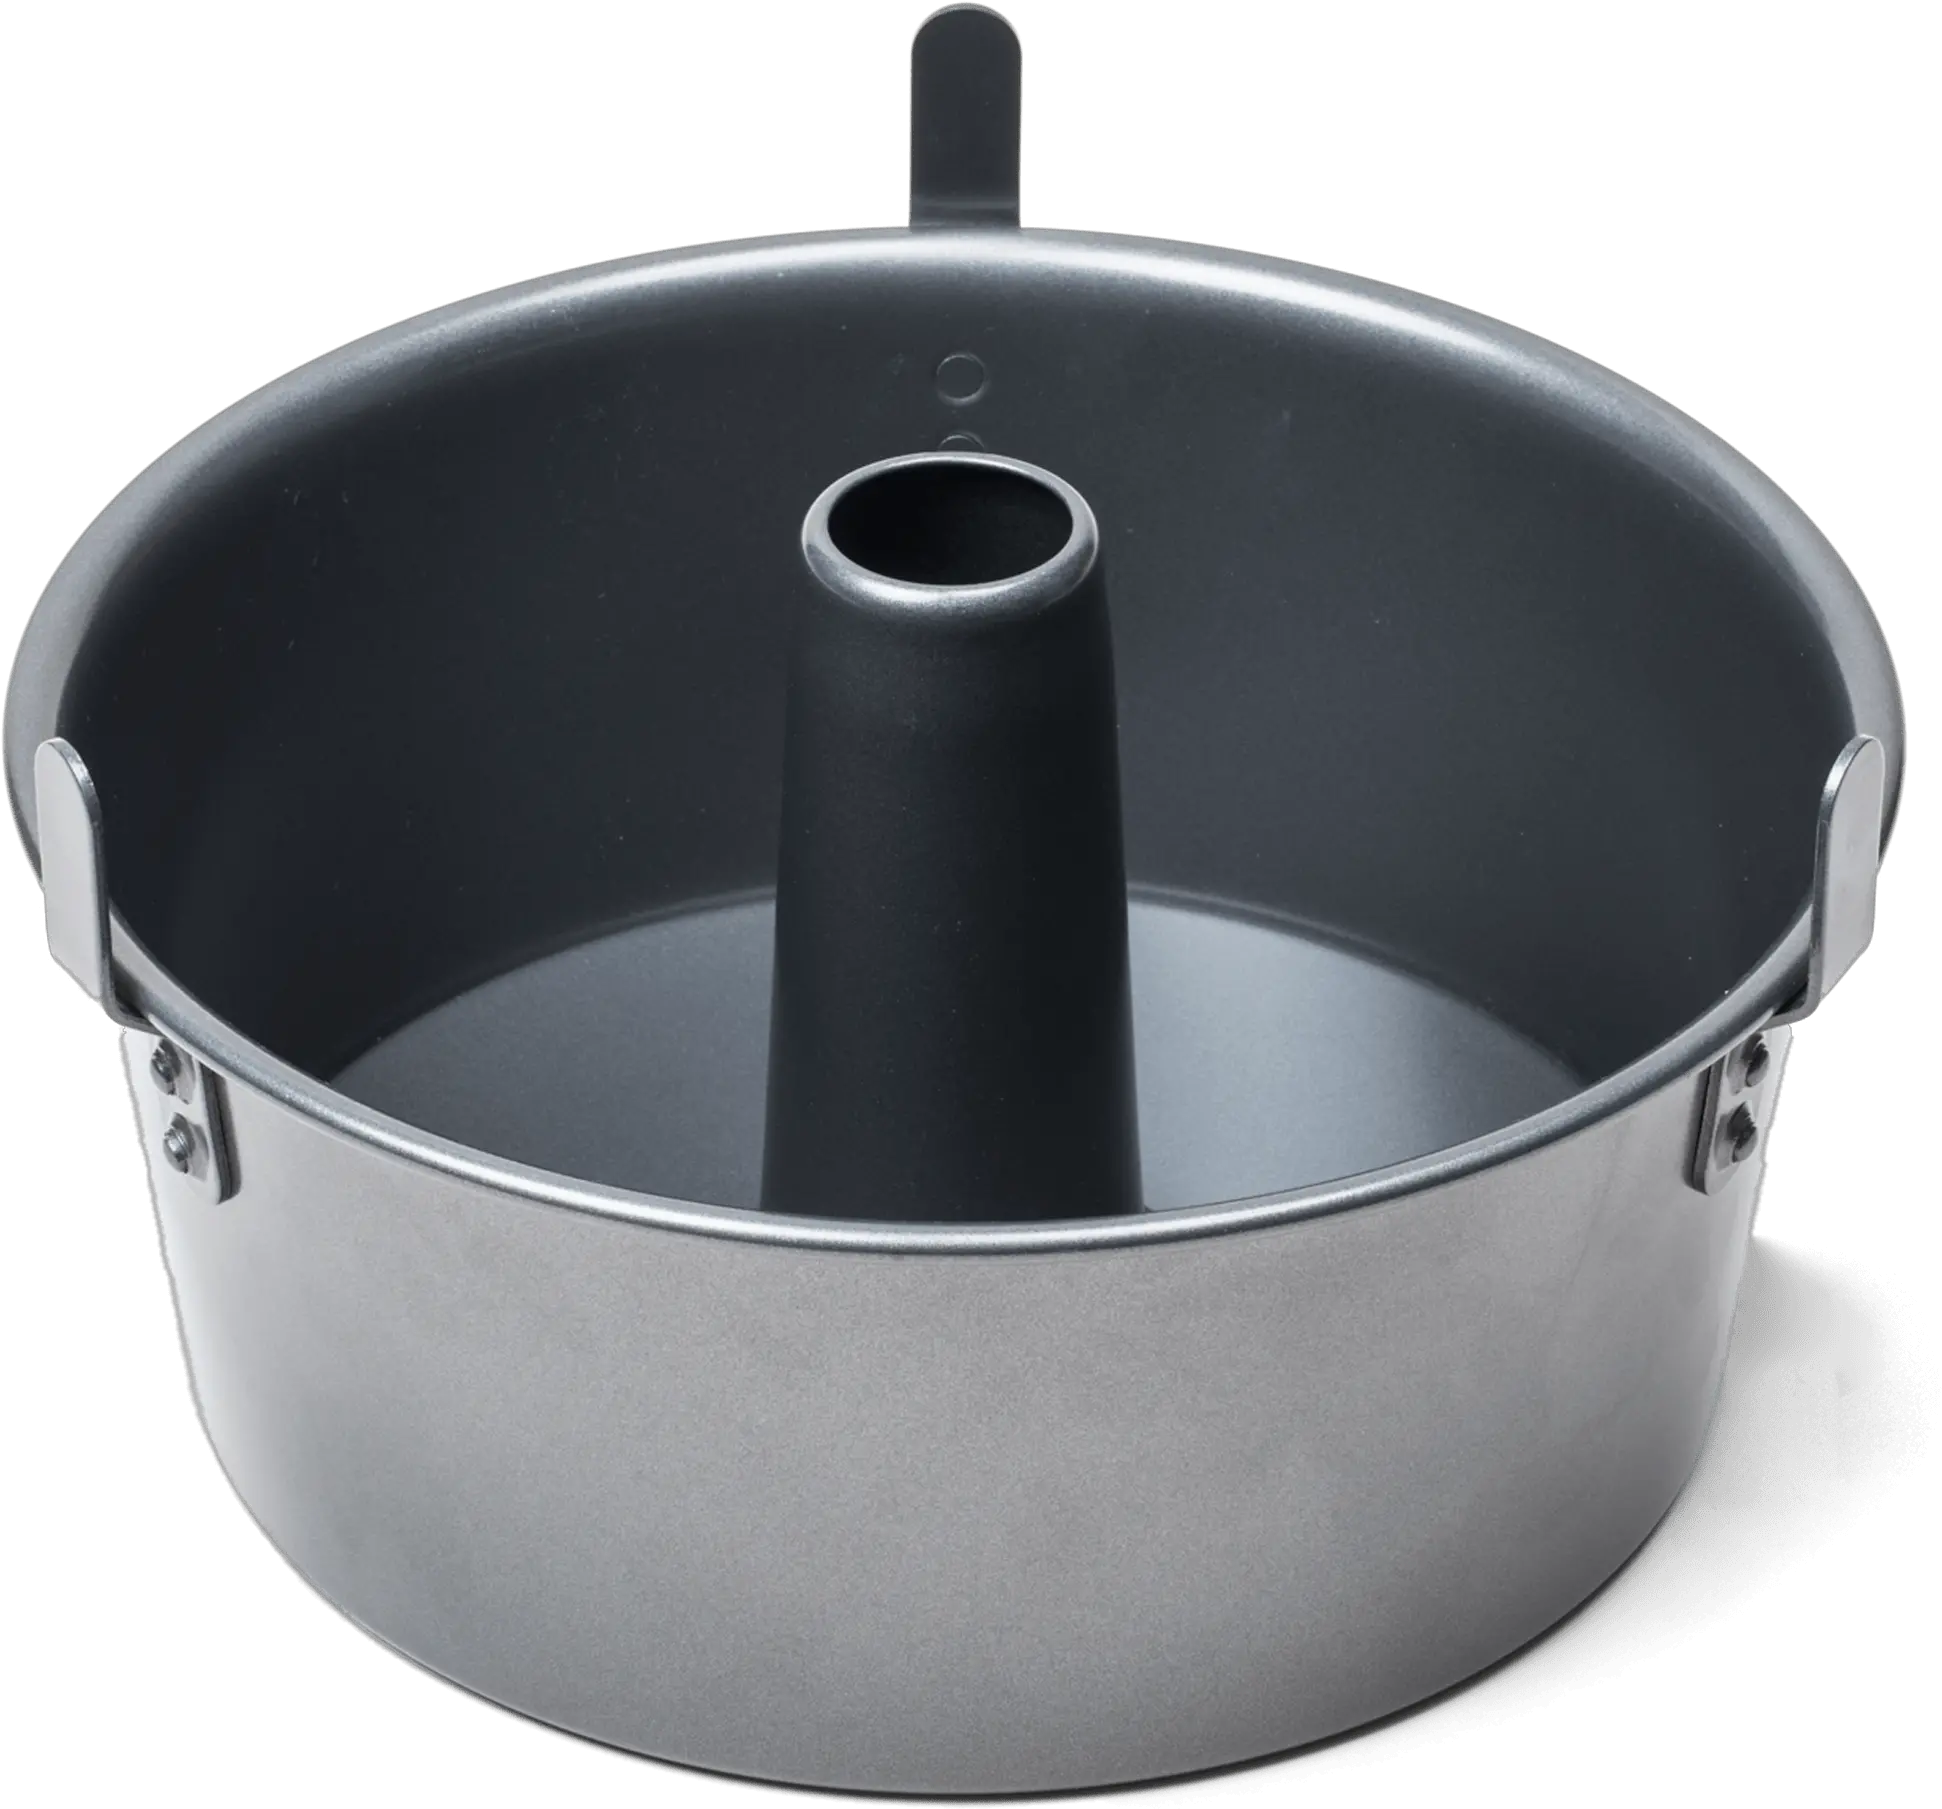 The Best Tube Pans Cooku0027s Illustrated Dutch Oven Png Pan Transparent